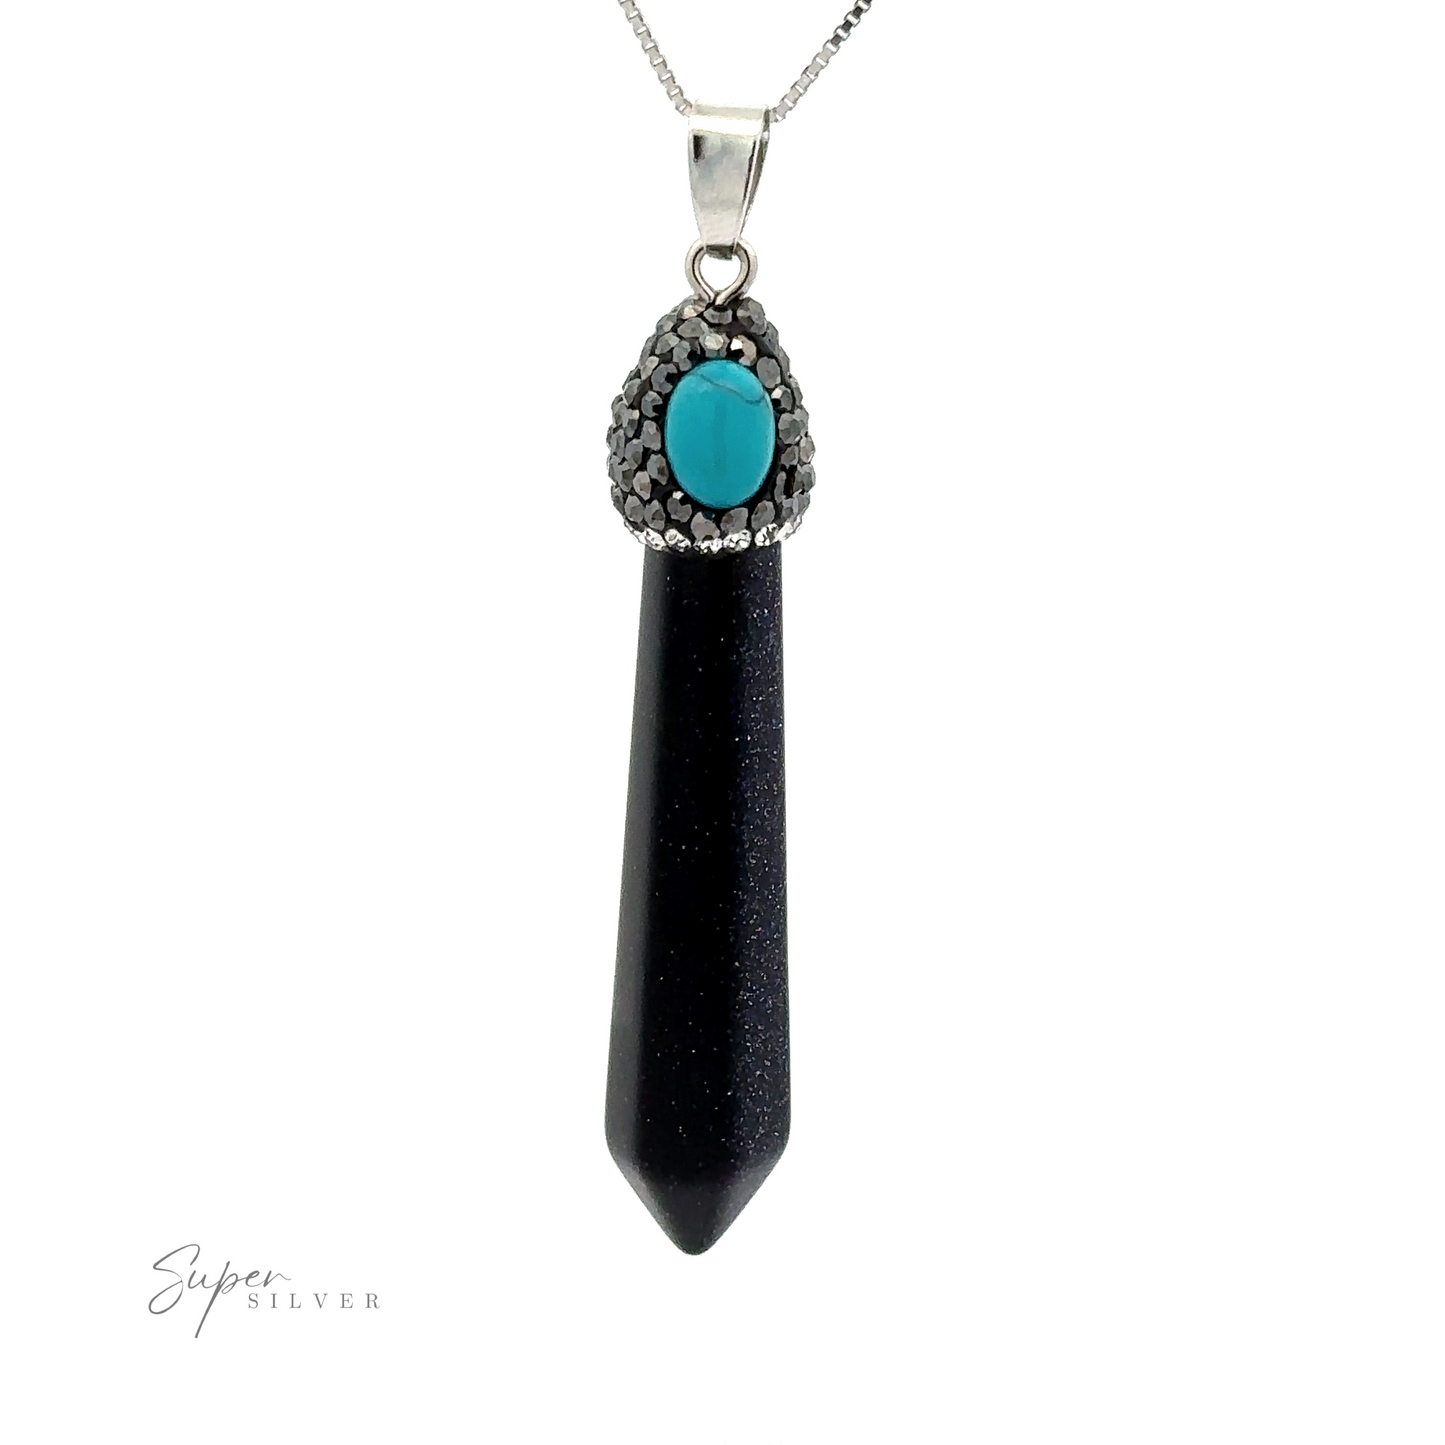 
                  
                    A black pendant necklace with a pointed end, featuring a turquoise stone accent set in a silver chain, reminiscent of a Stone Obelisk Pendant in its elegant design.
                  
                